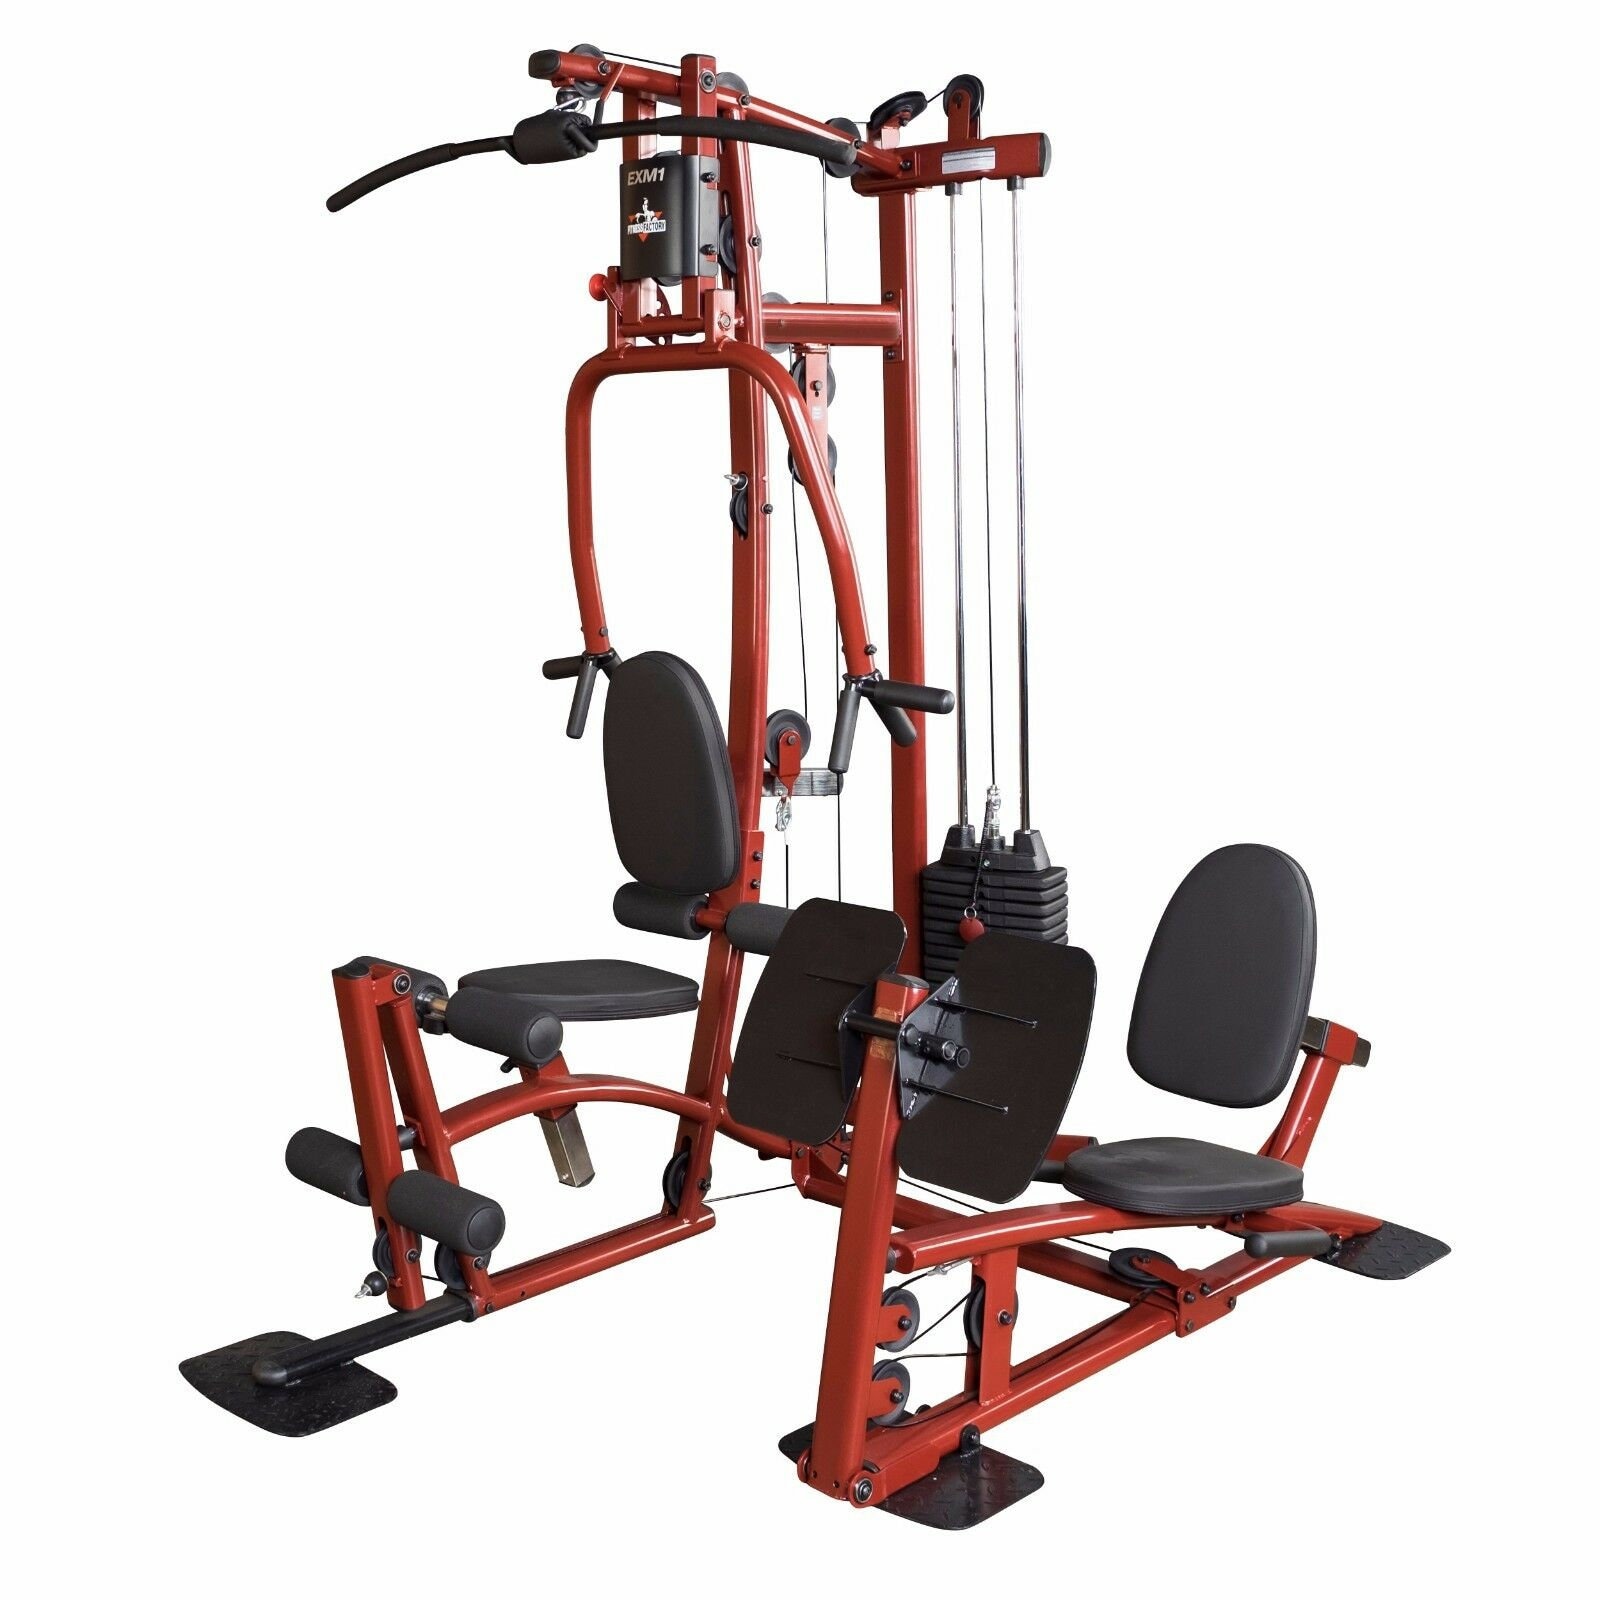 Body Solid Home Gym for sale Only 3 left at 60